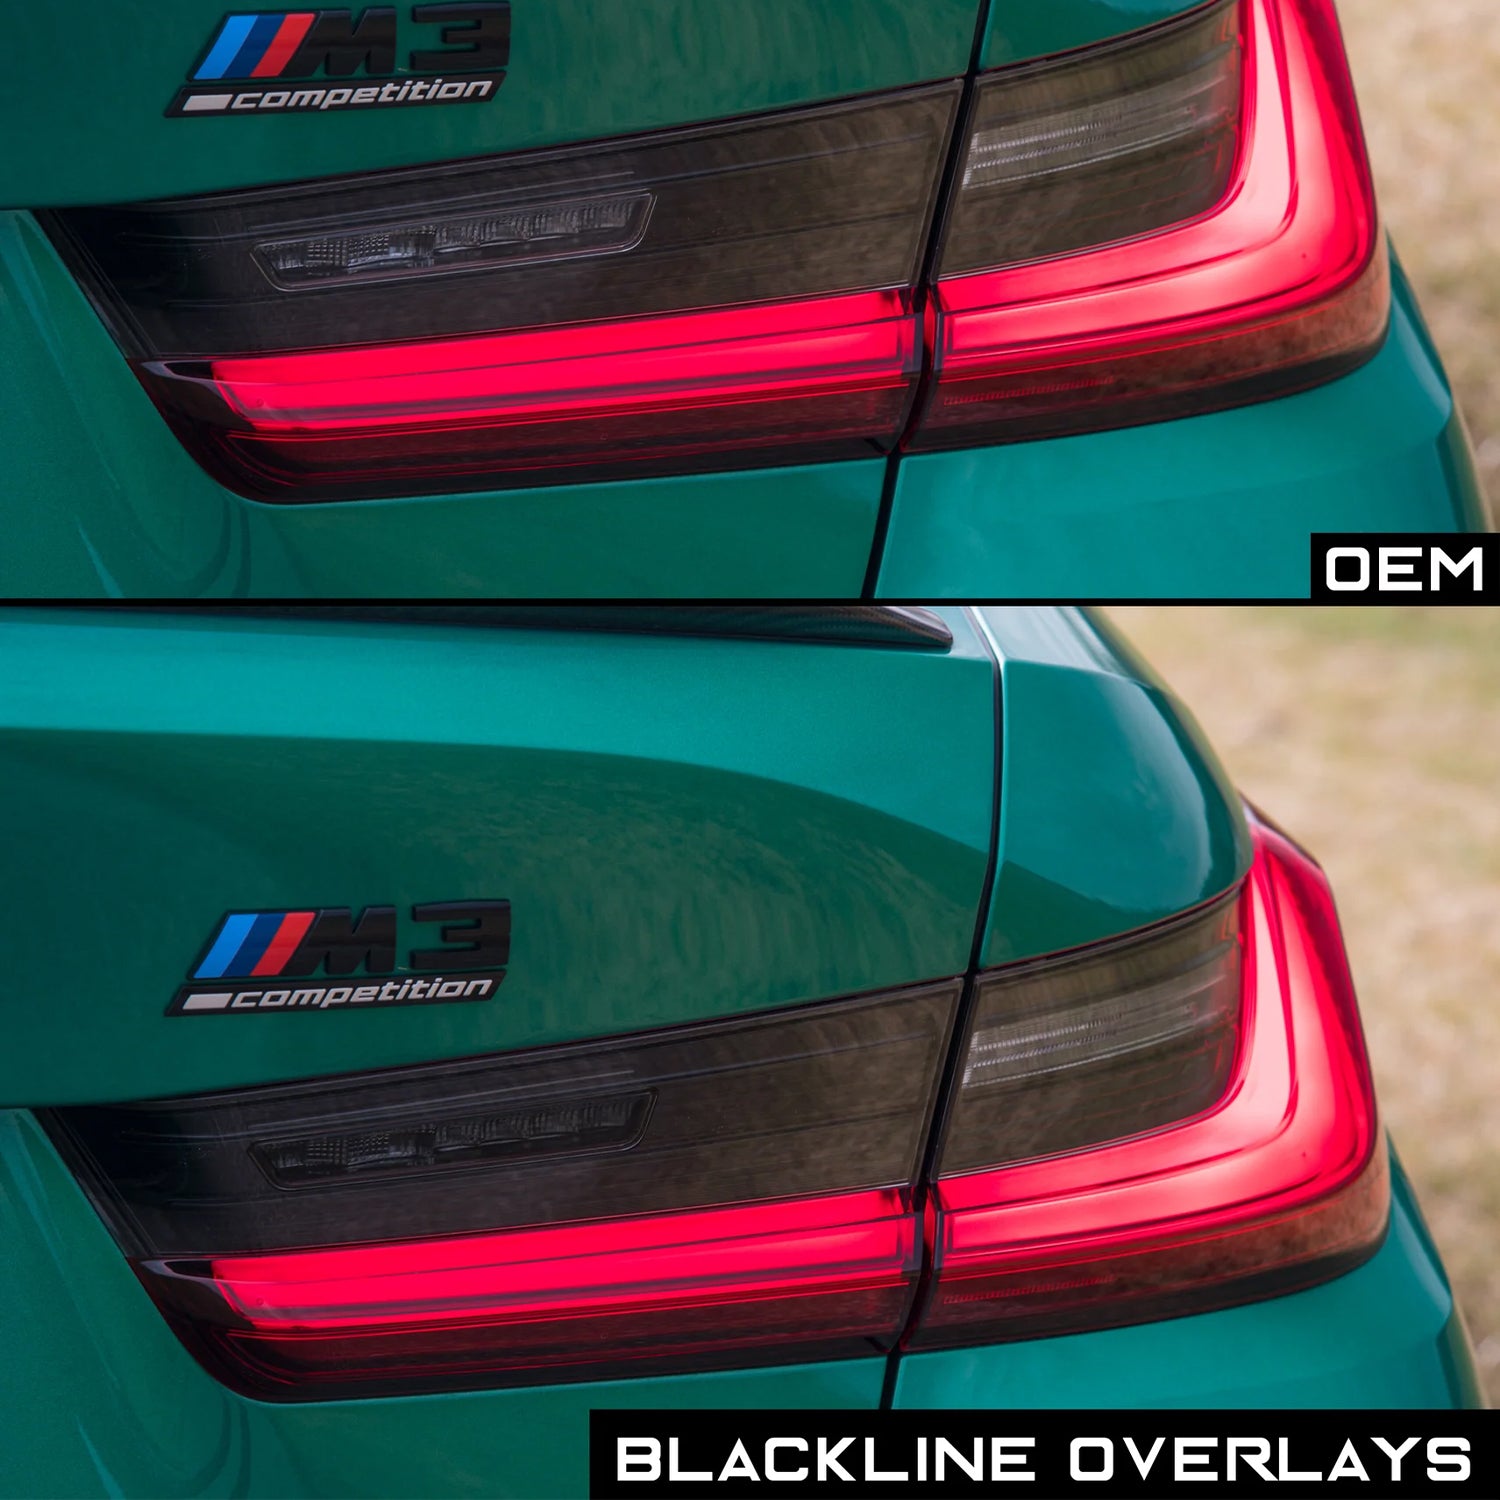 GoldenWrench Supply BMW G80 M3 G20 3 Series BLACKLINE Taillight Overlay Kit Before & After